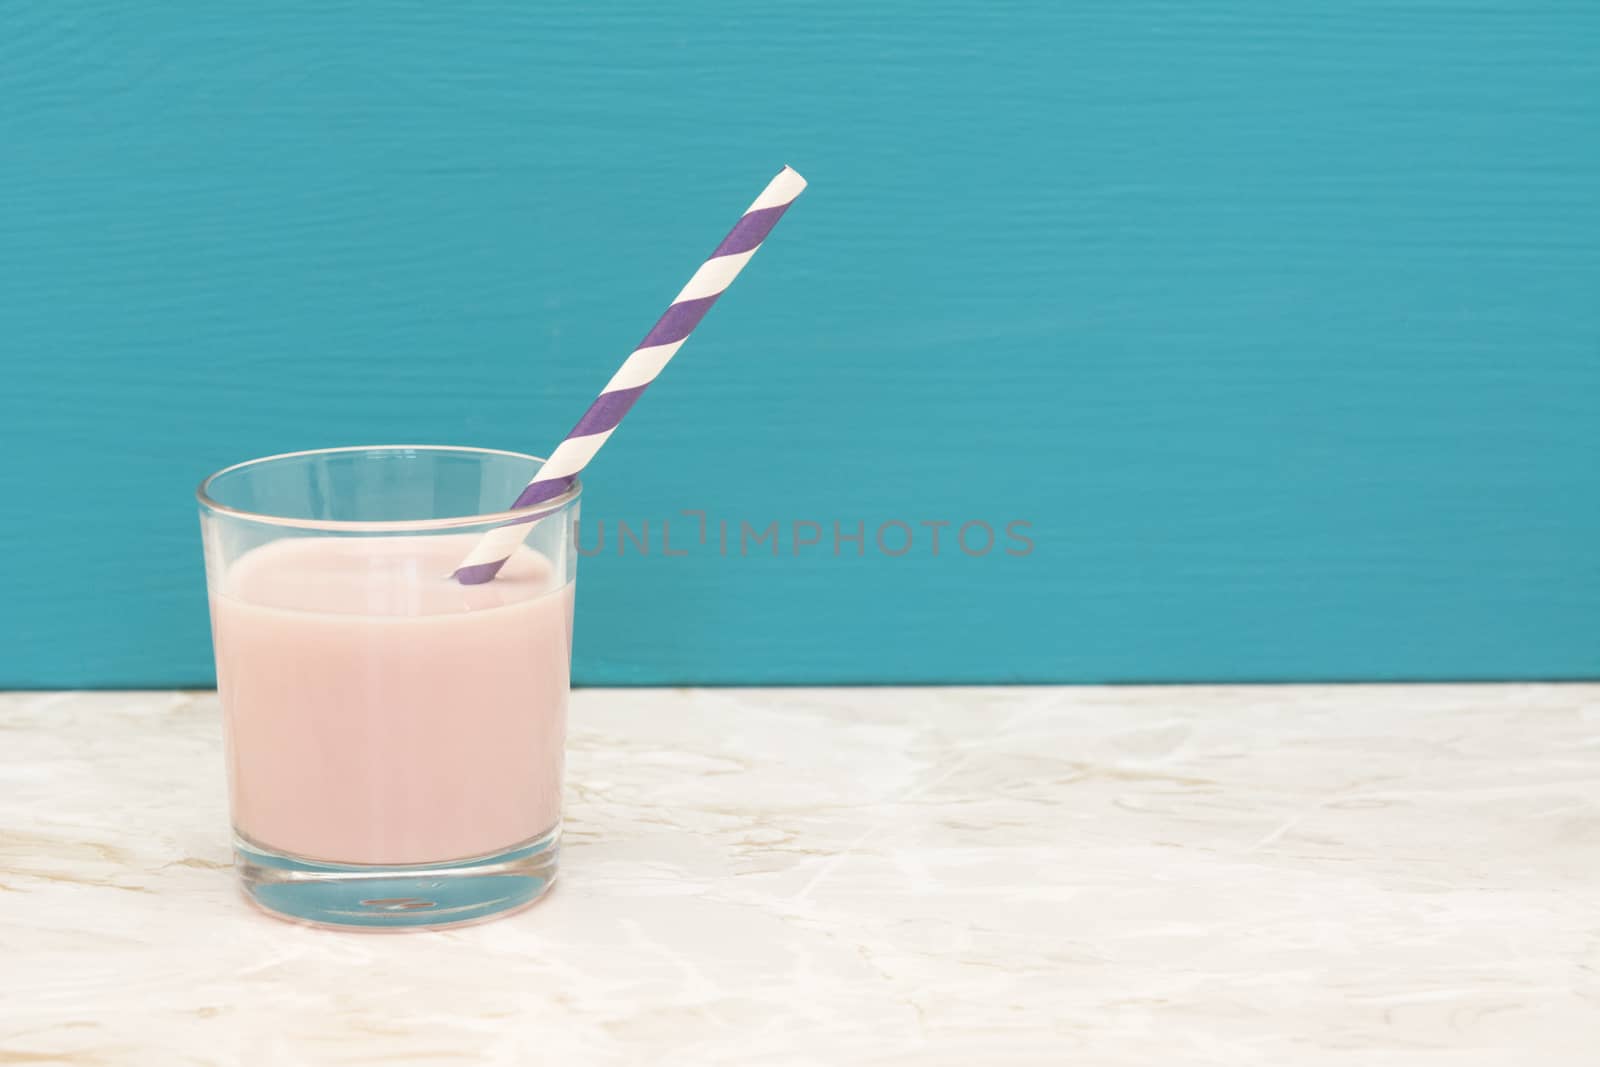 Delicious strawberry milkshake with a retro paper straw in a glass tumbler with a teal background and copy space